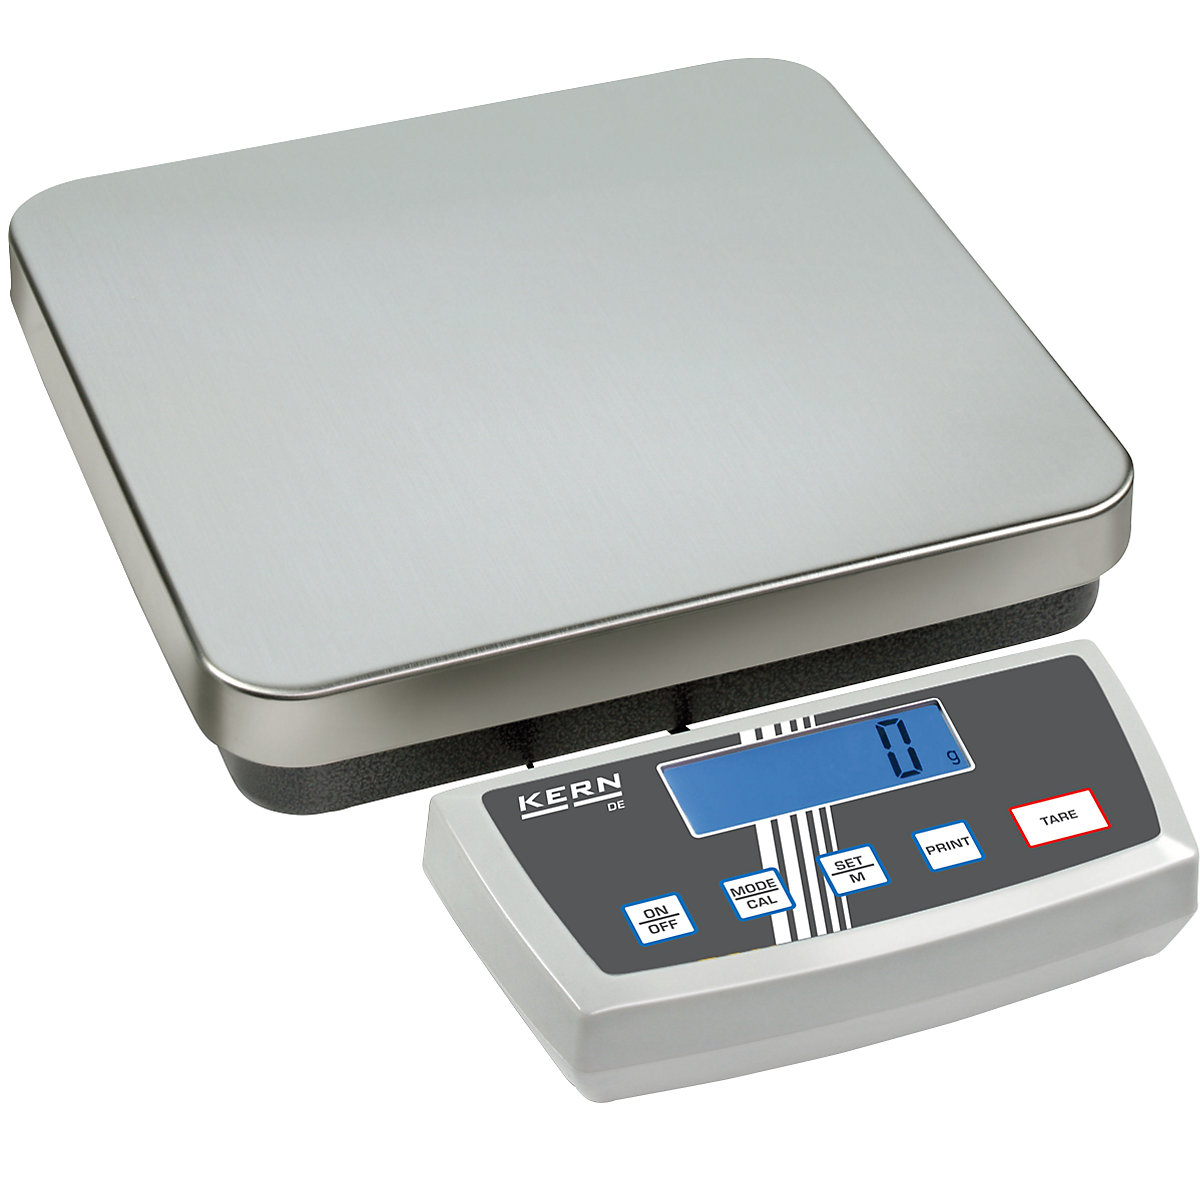 Platform scales – KERN, dual range scales, weighing range up to 6 kg, read-out accuracy 1 / 2 g, weighing plate 318 x 308 mm-3